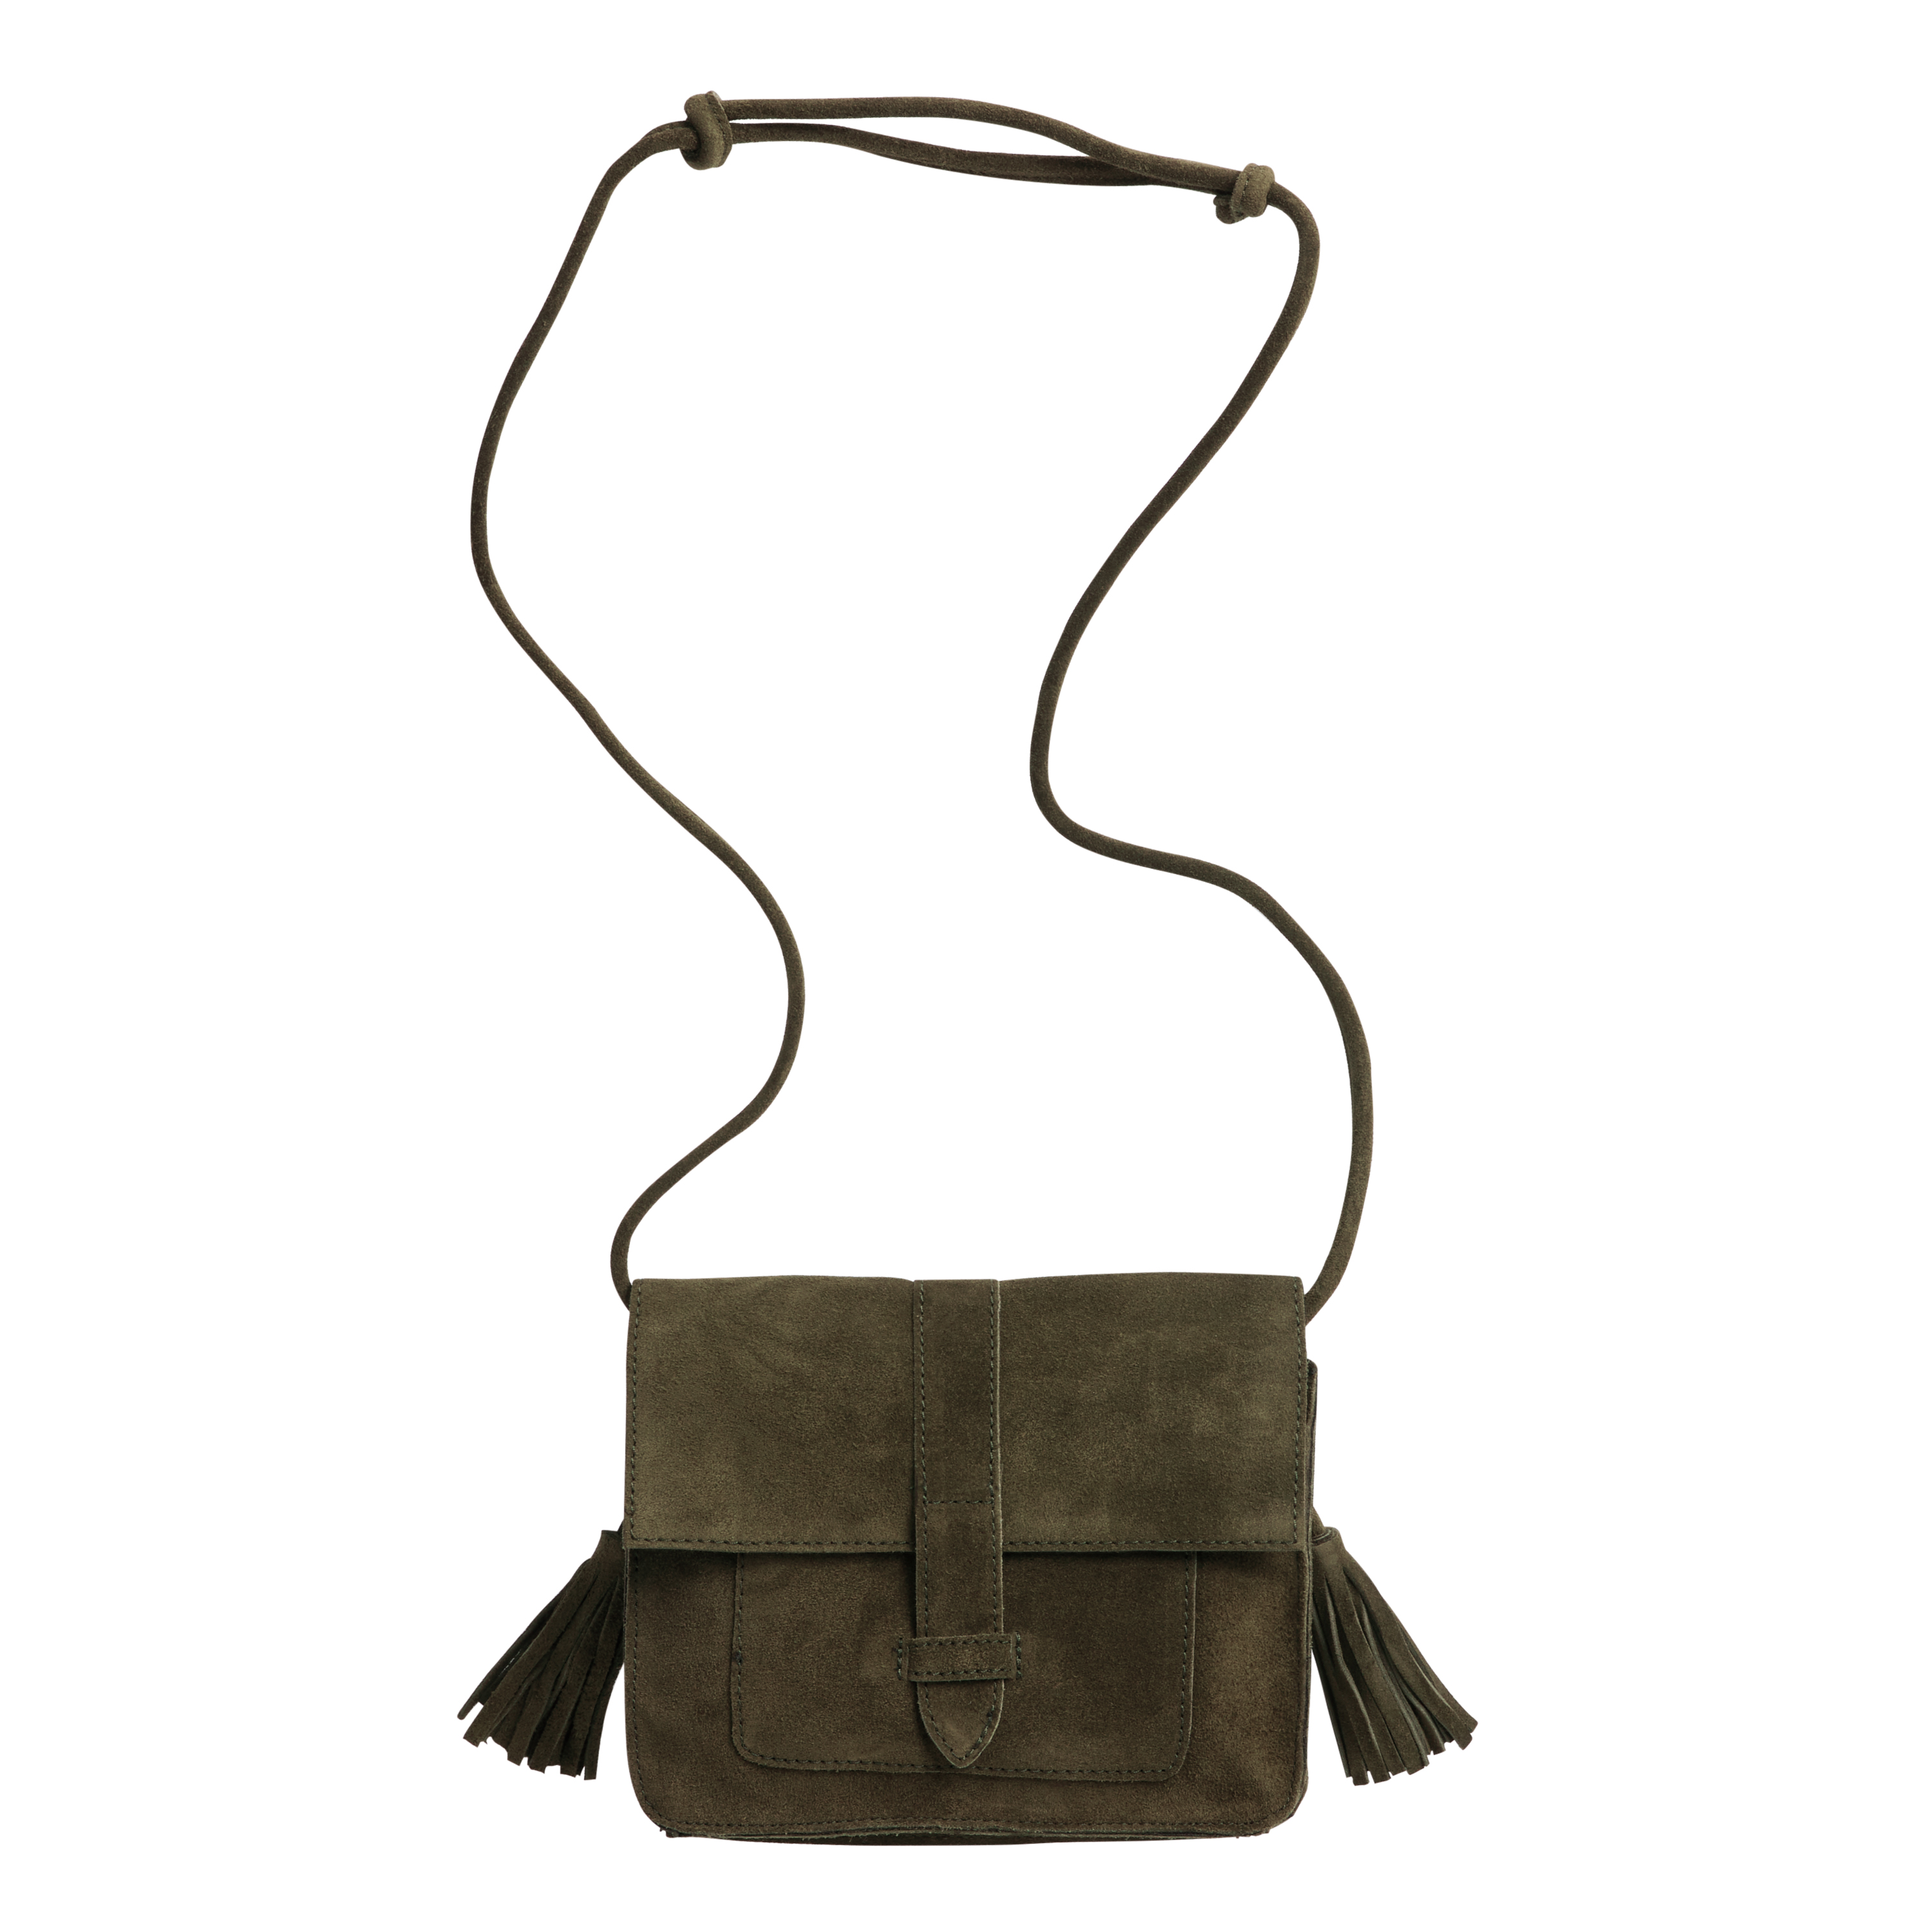 Town Crossbody Bag: Olive Vegan Suede - Perfect for Fall!